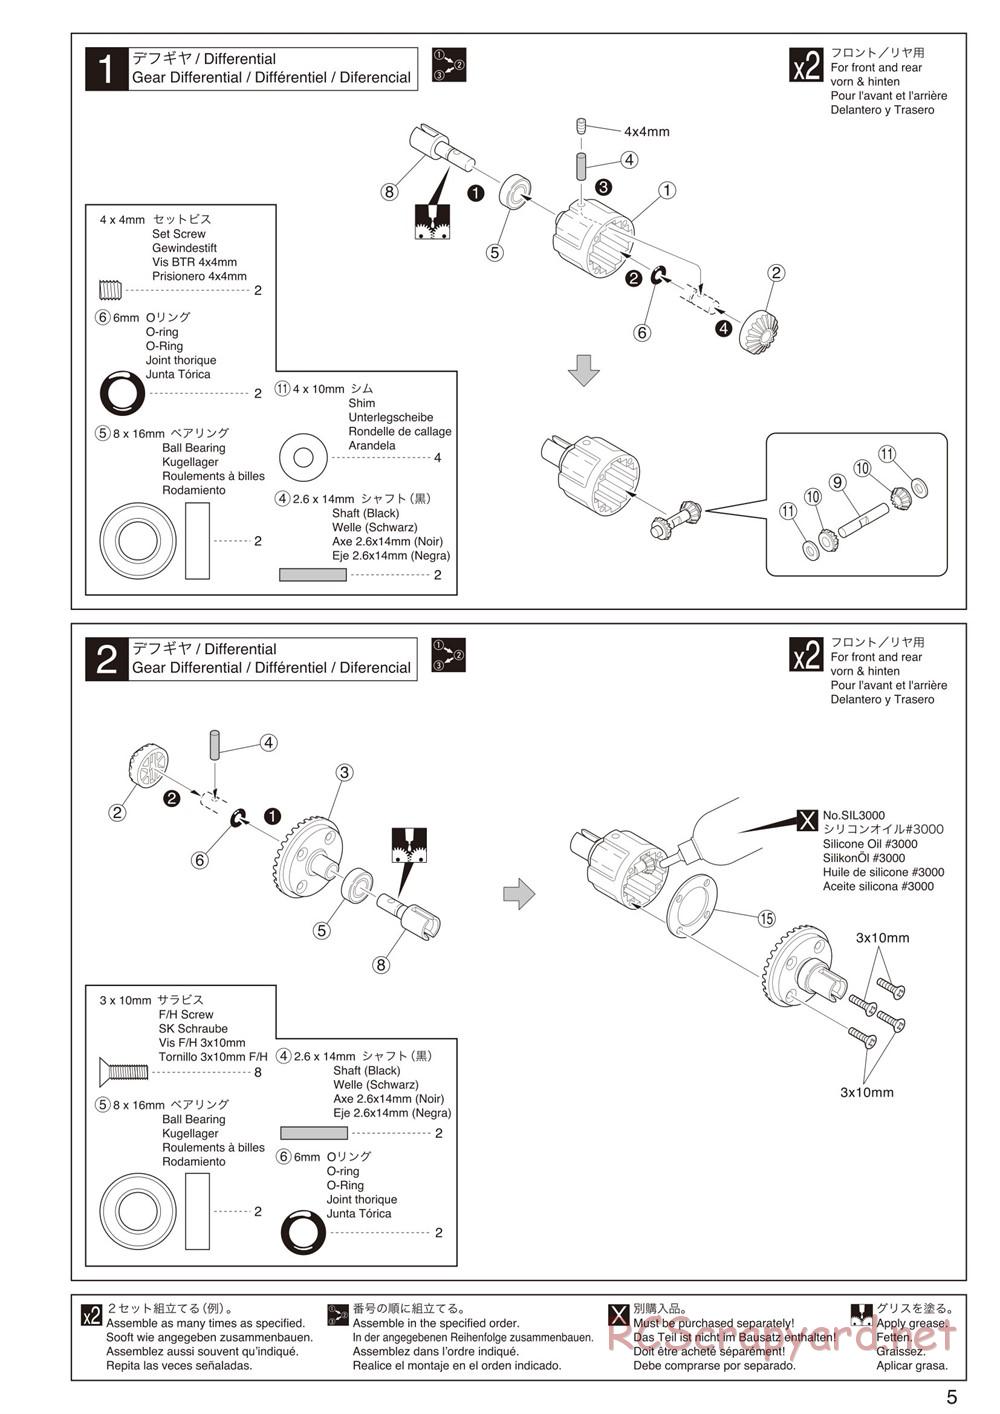 Kyosho - Mad Force Kruiser 2.0 - Manual - Page 5